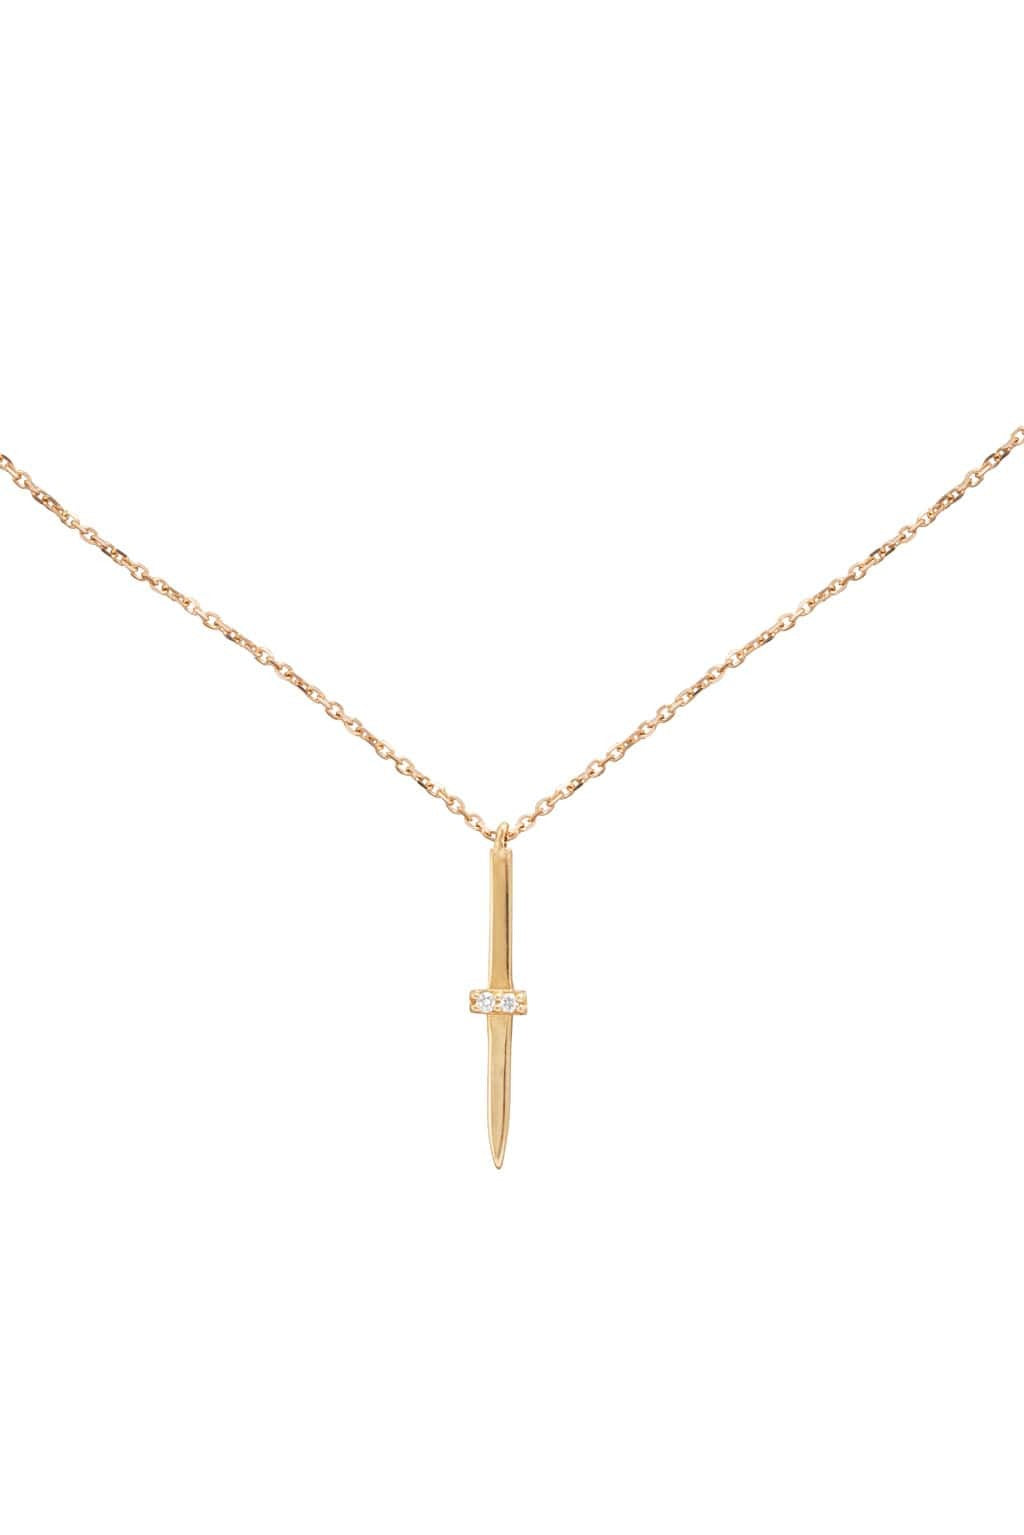 Sword gold necklace